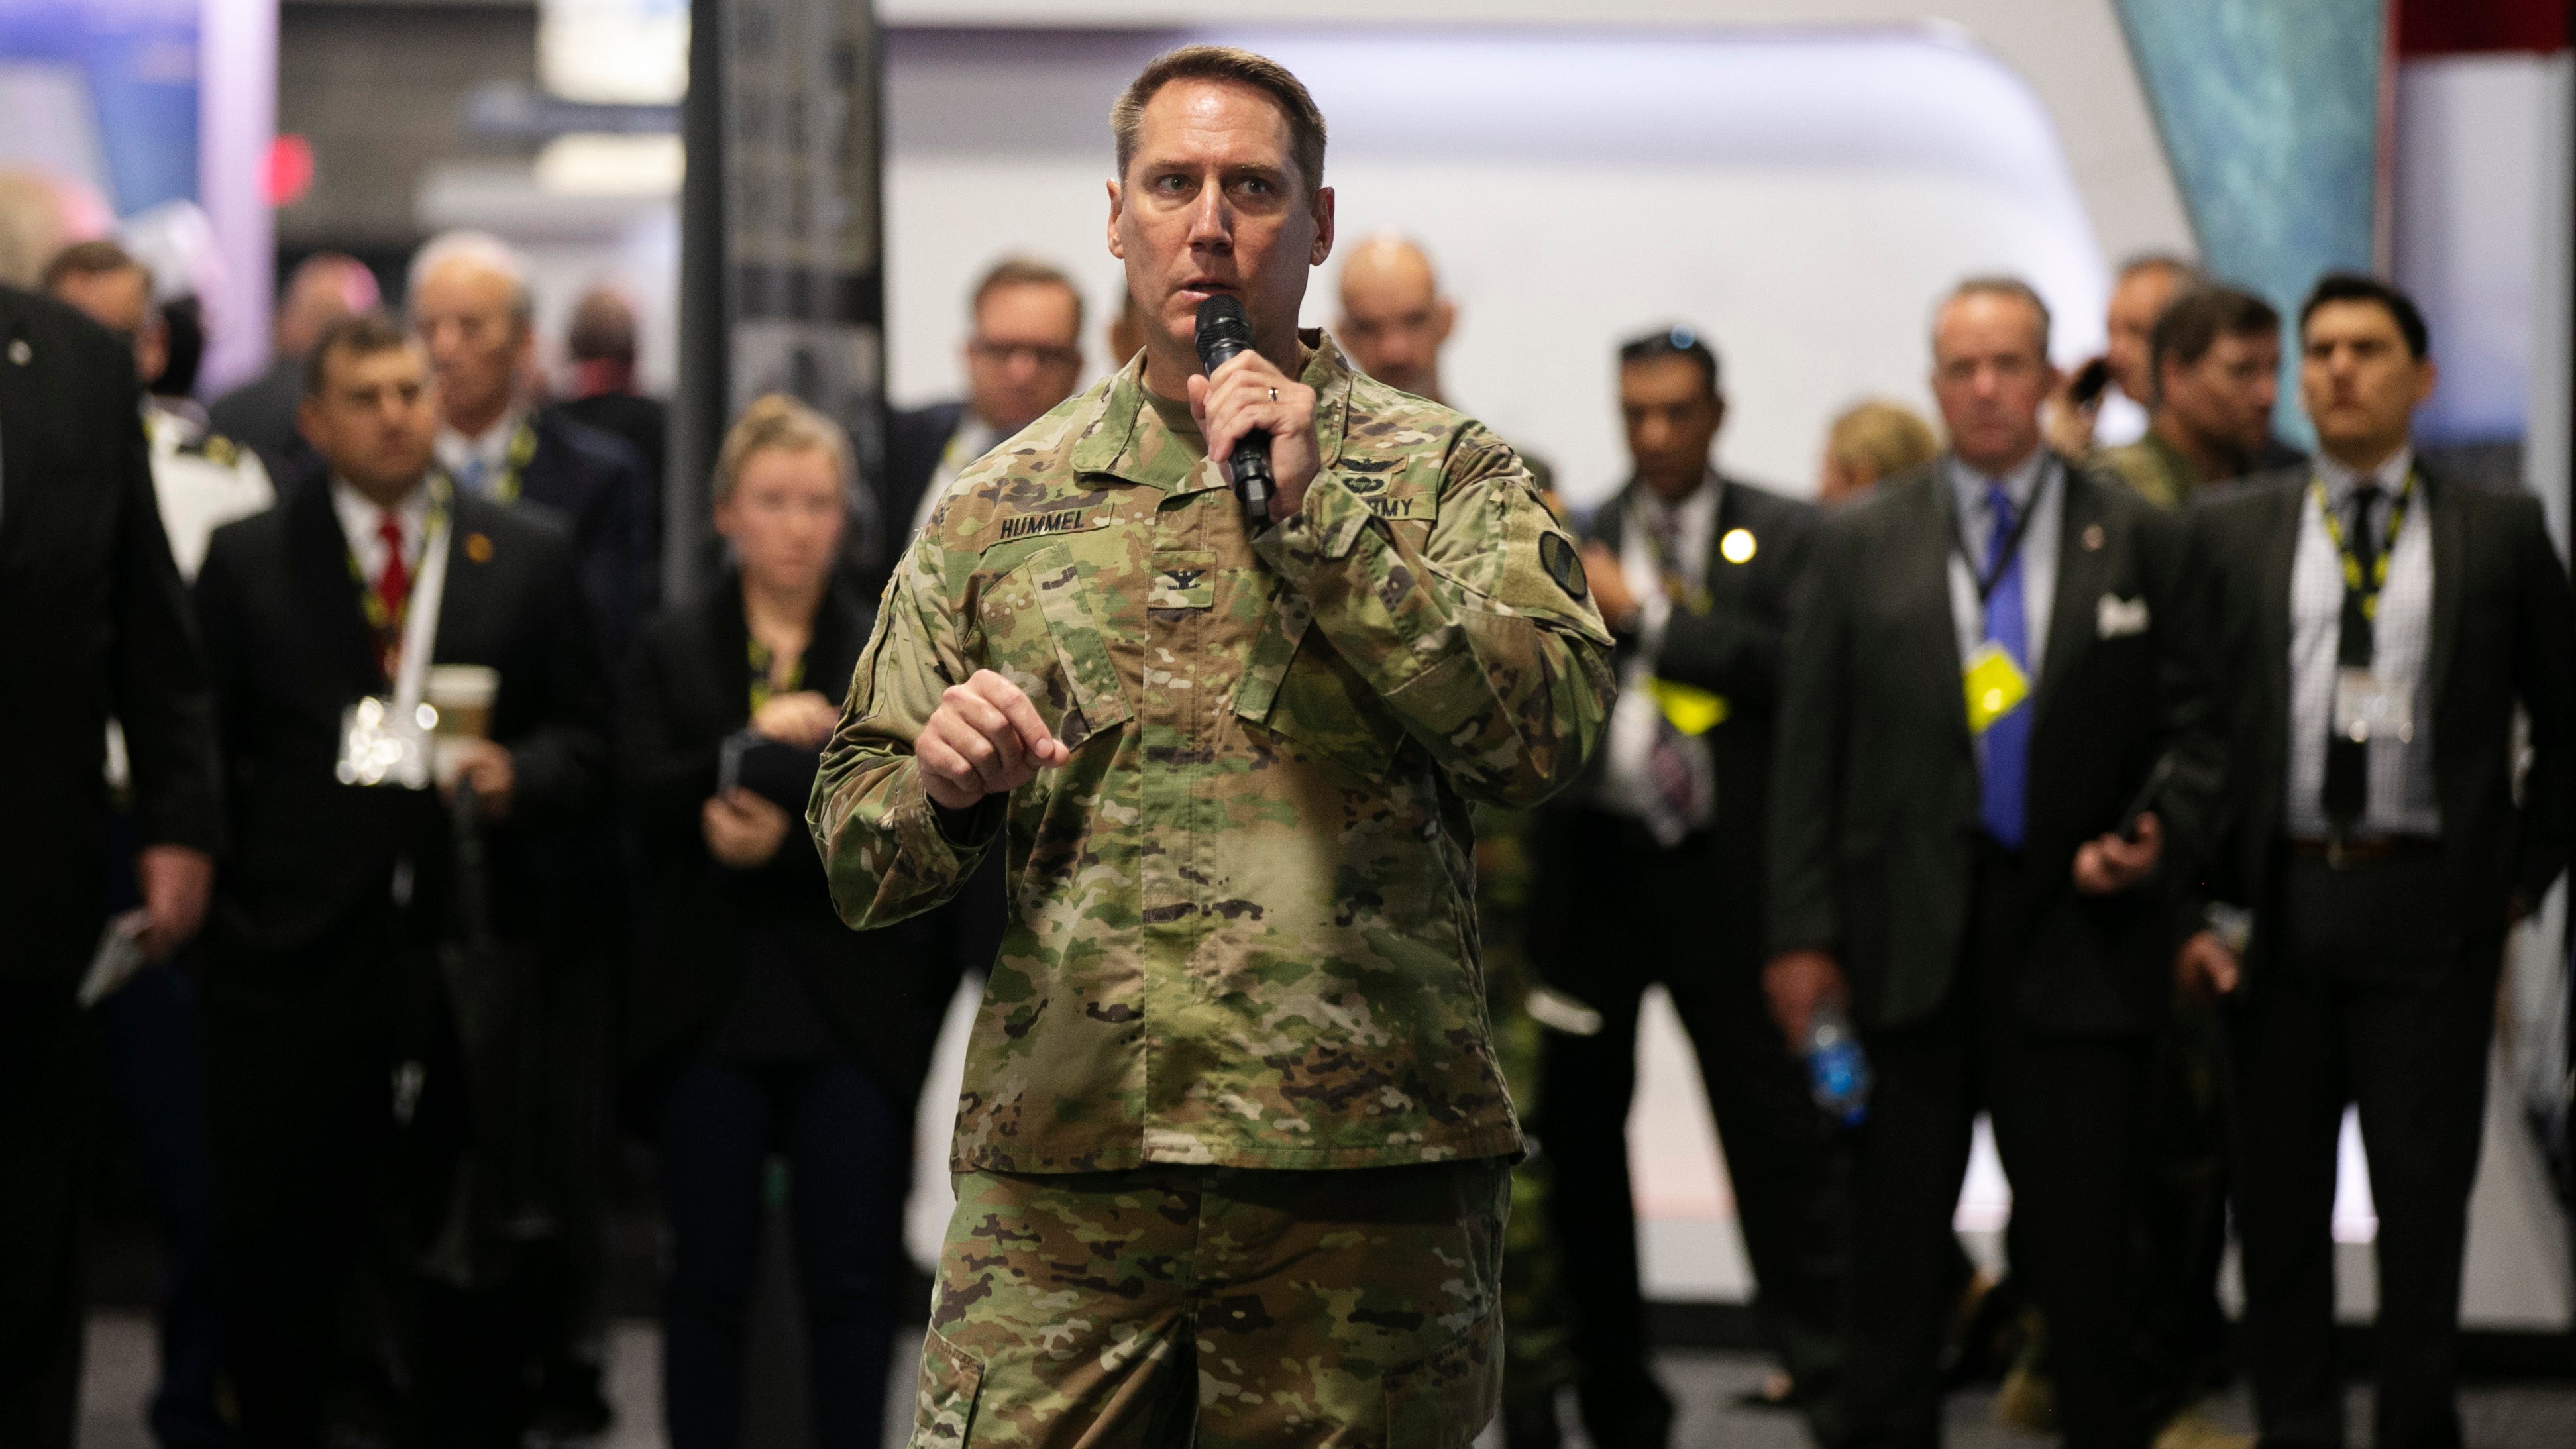 Col. Timothy Hummel, from U.S. Army Training and Doctrine Command, addresses attendees at a Warriors Corner session titled “Developing Leaders for Multidomain Operations” during the 2019 AUSA Annual Meeting and Exposition on Oct. 14, 2019.